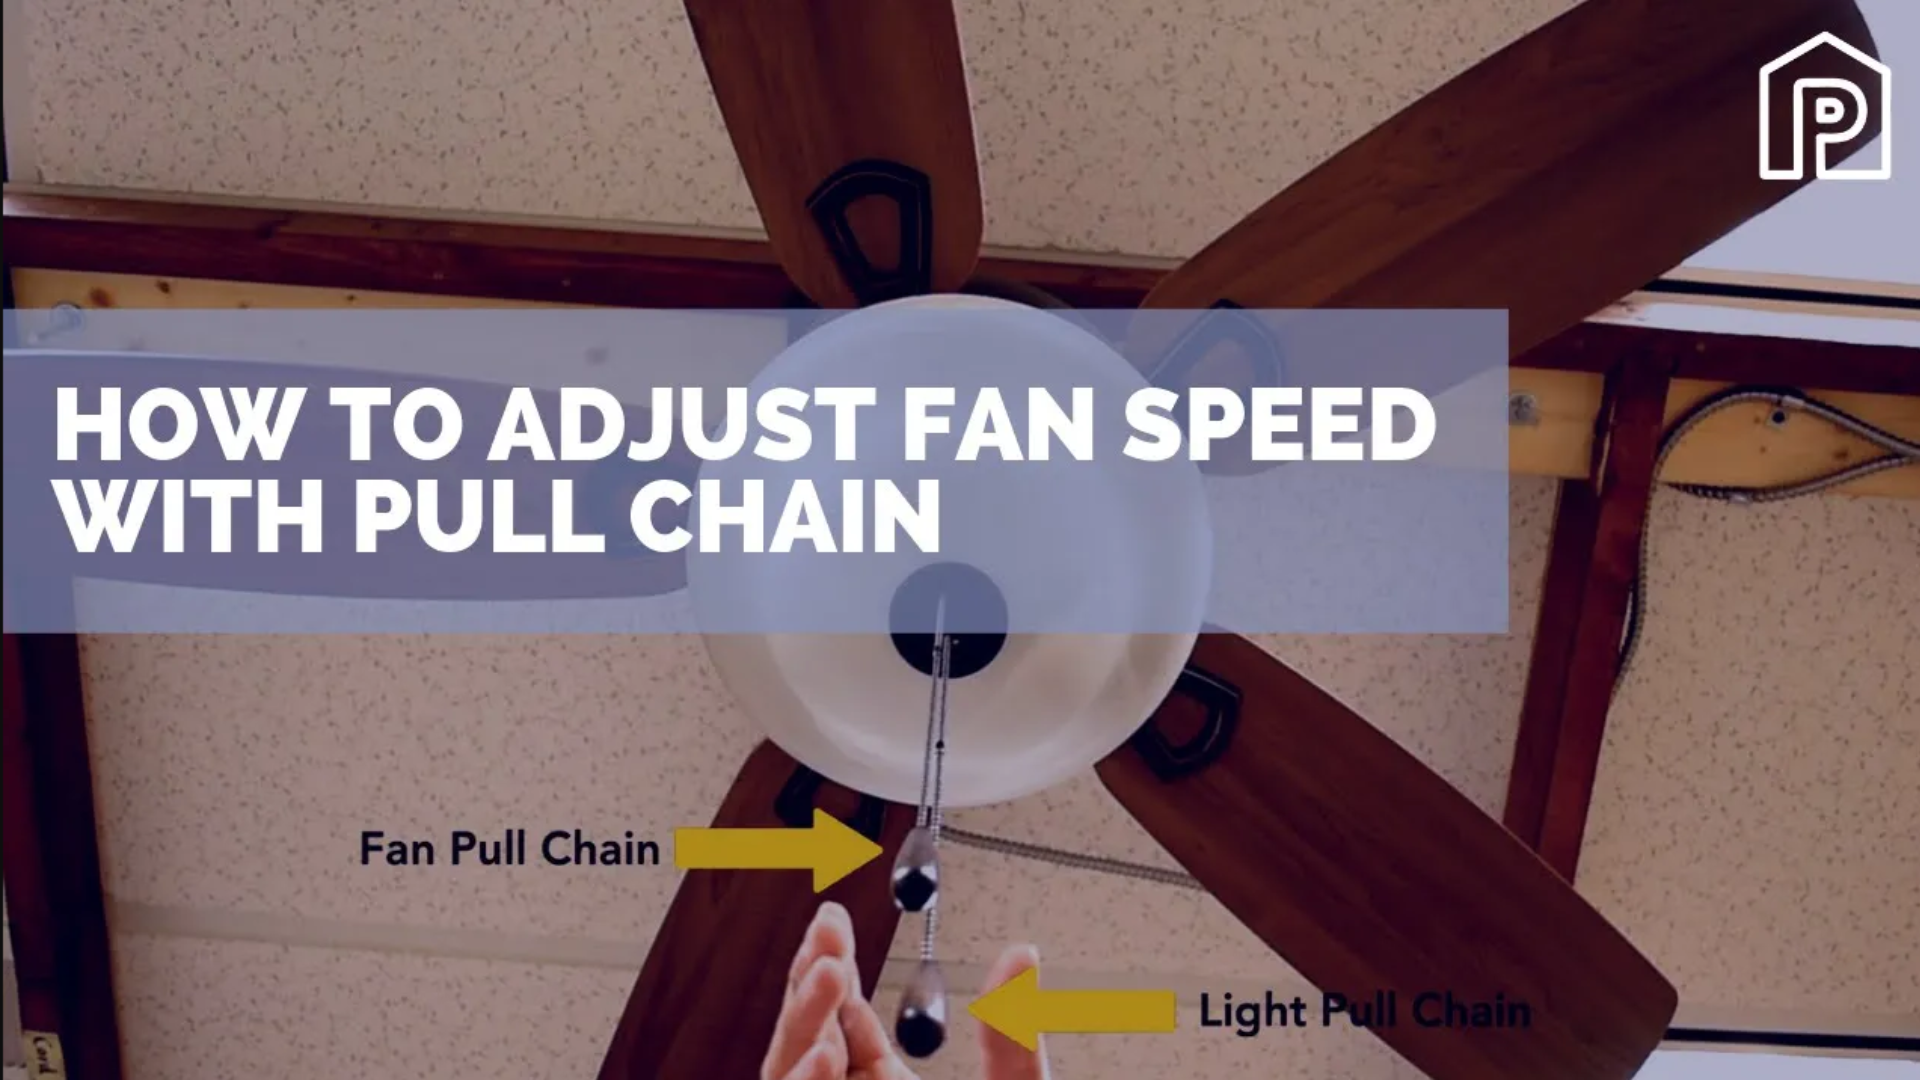 How To Adjust Speed With Pull Chains For Ceiling Fans